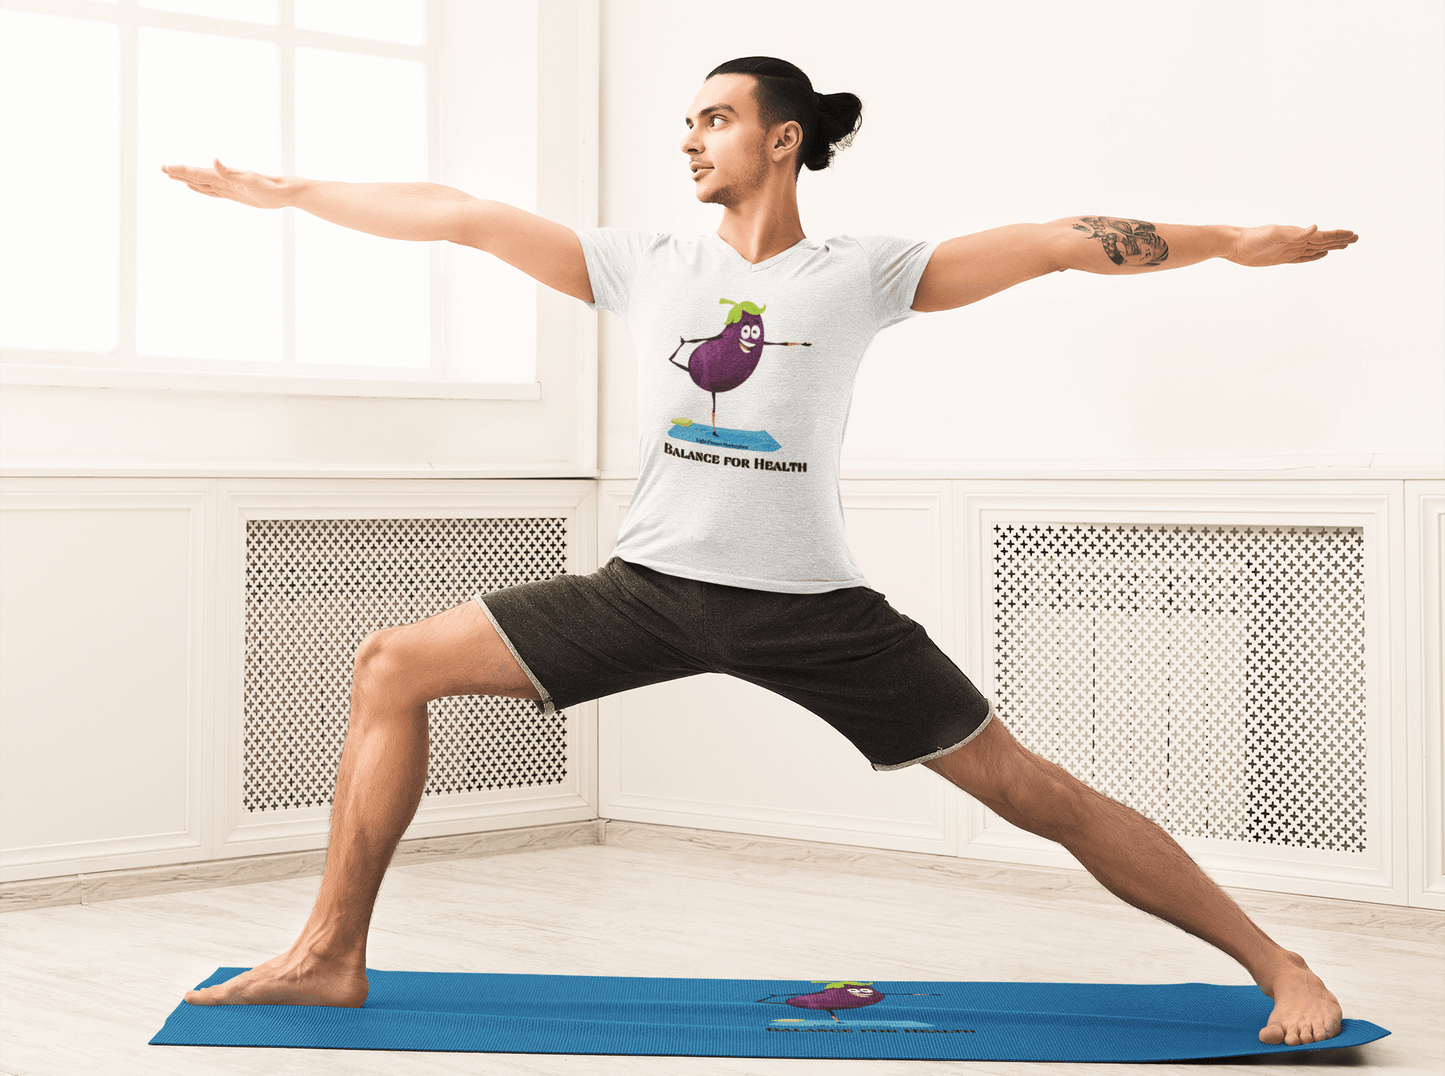 A person in a room doing yoga wearing a t-shirt with a cartoon eggplant, black pants, and a blue mat with a fish. The unisex Eggplant Balance for Health T-Shirt, 100% cotton, lightweight, with twill tape shoulders for durability.